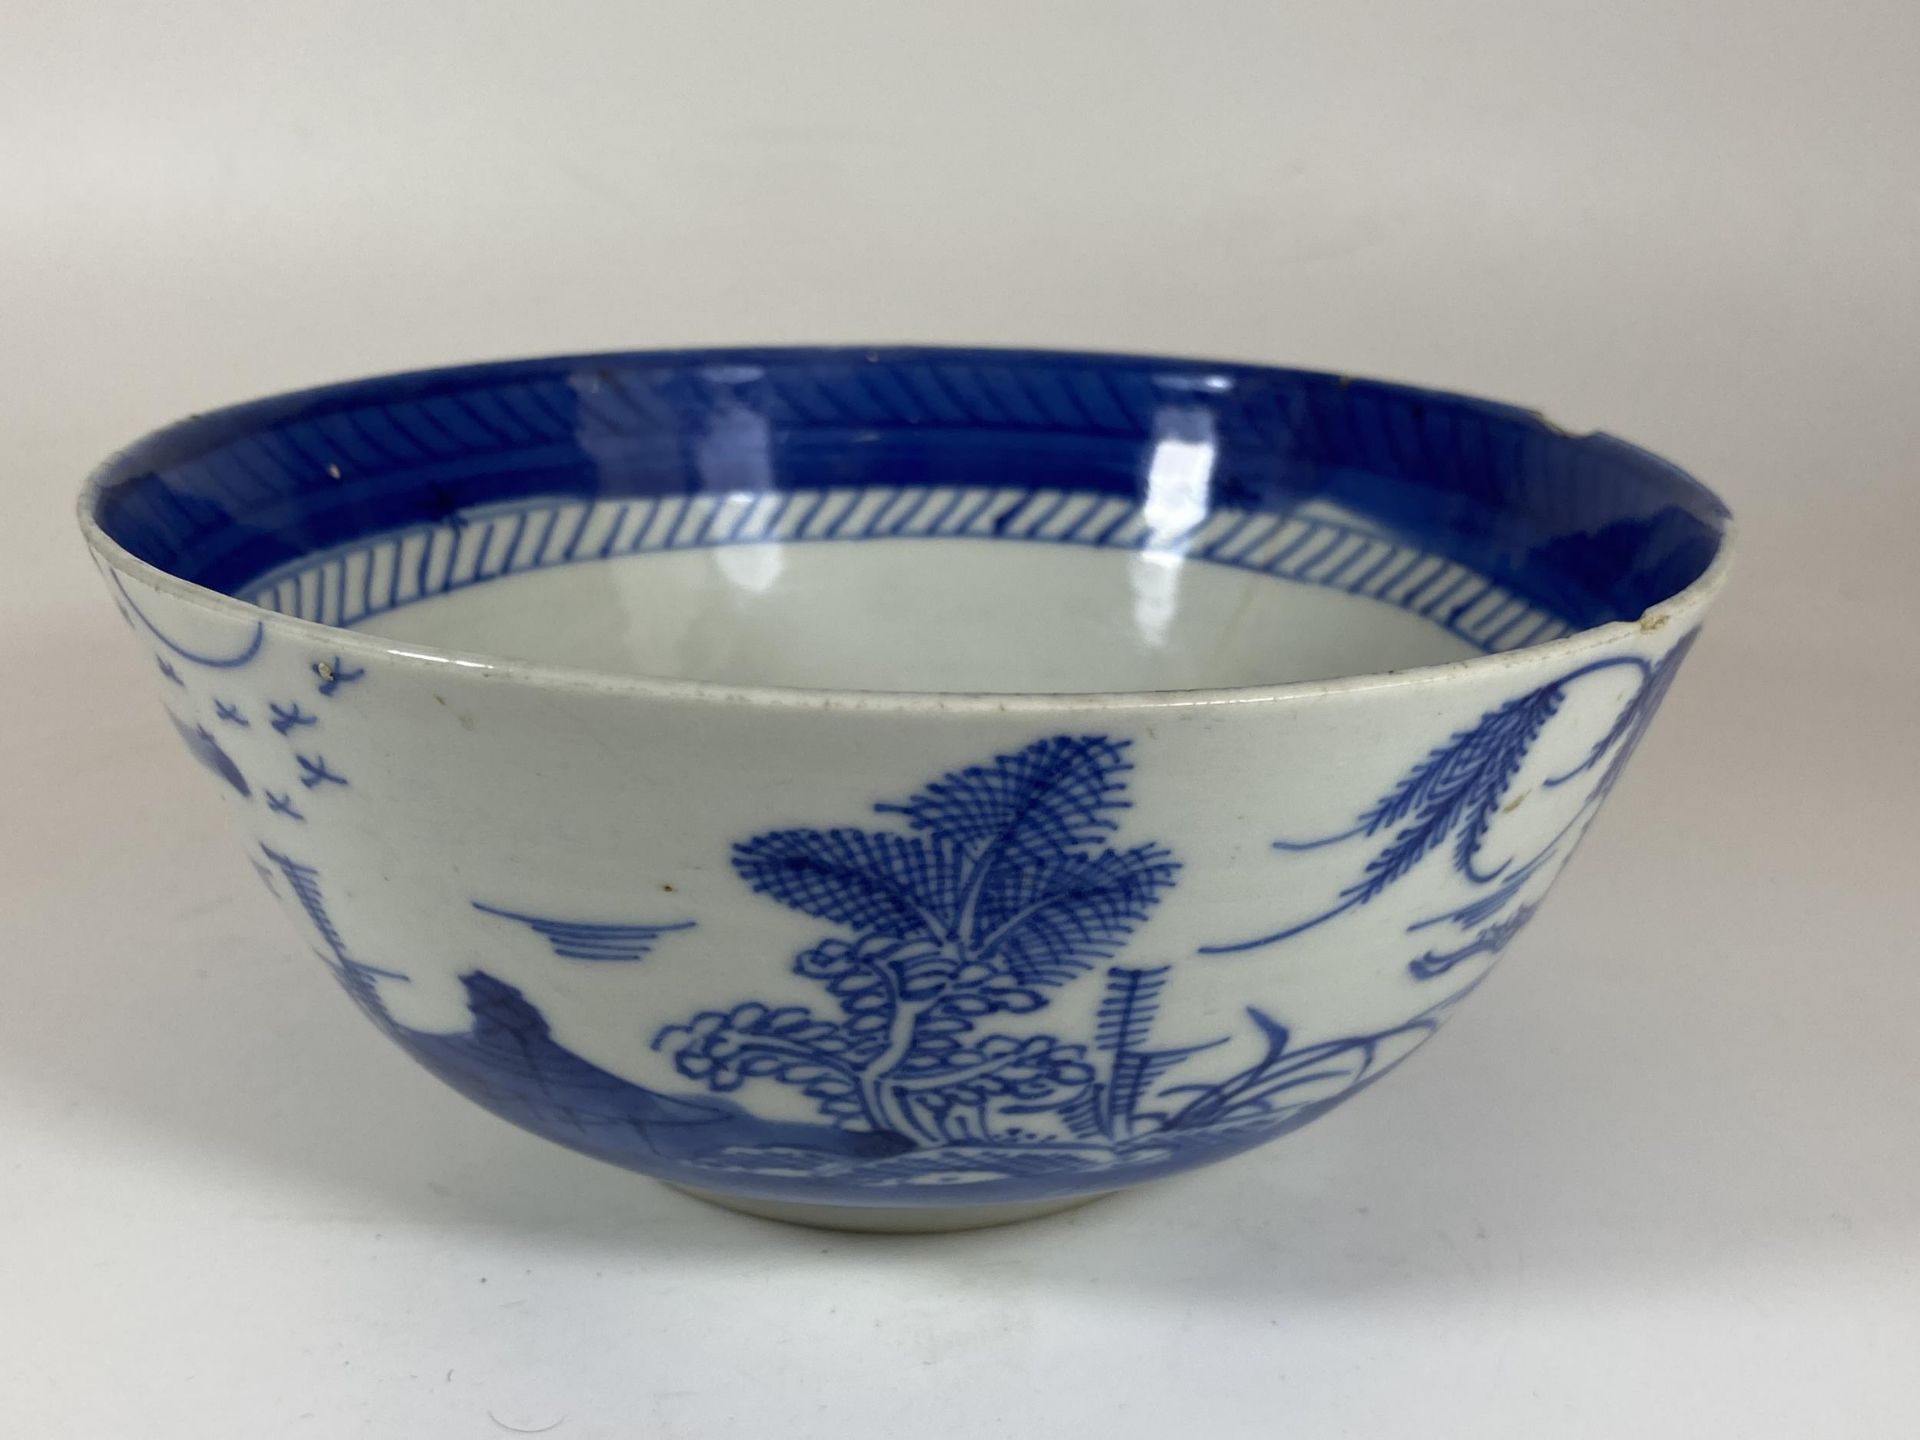 A 19TH CENTURY CHINESE EXPORT BLUE AND WHITE PORCELAIN BOWL WITH PAGODA DESIGN, DIAMETER 17CM - Image 2 of 6